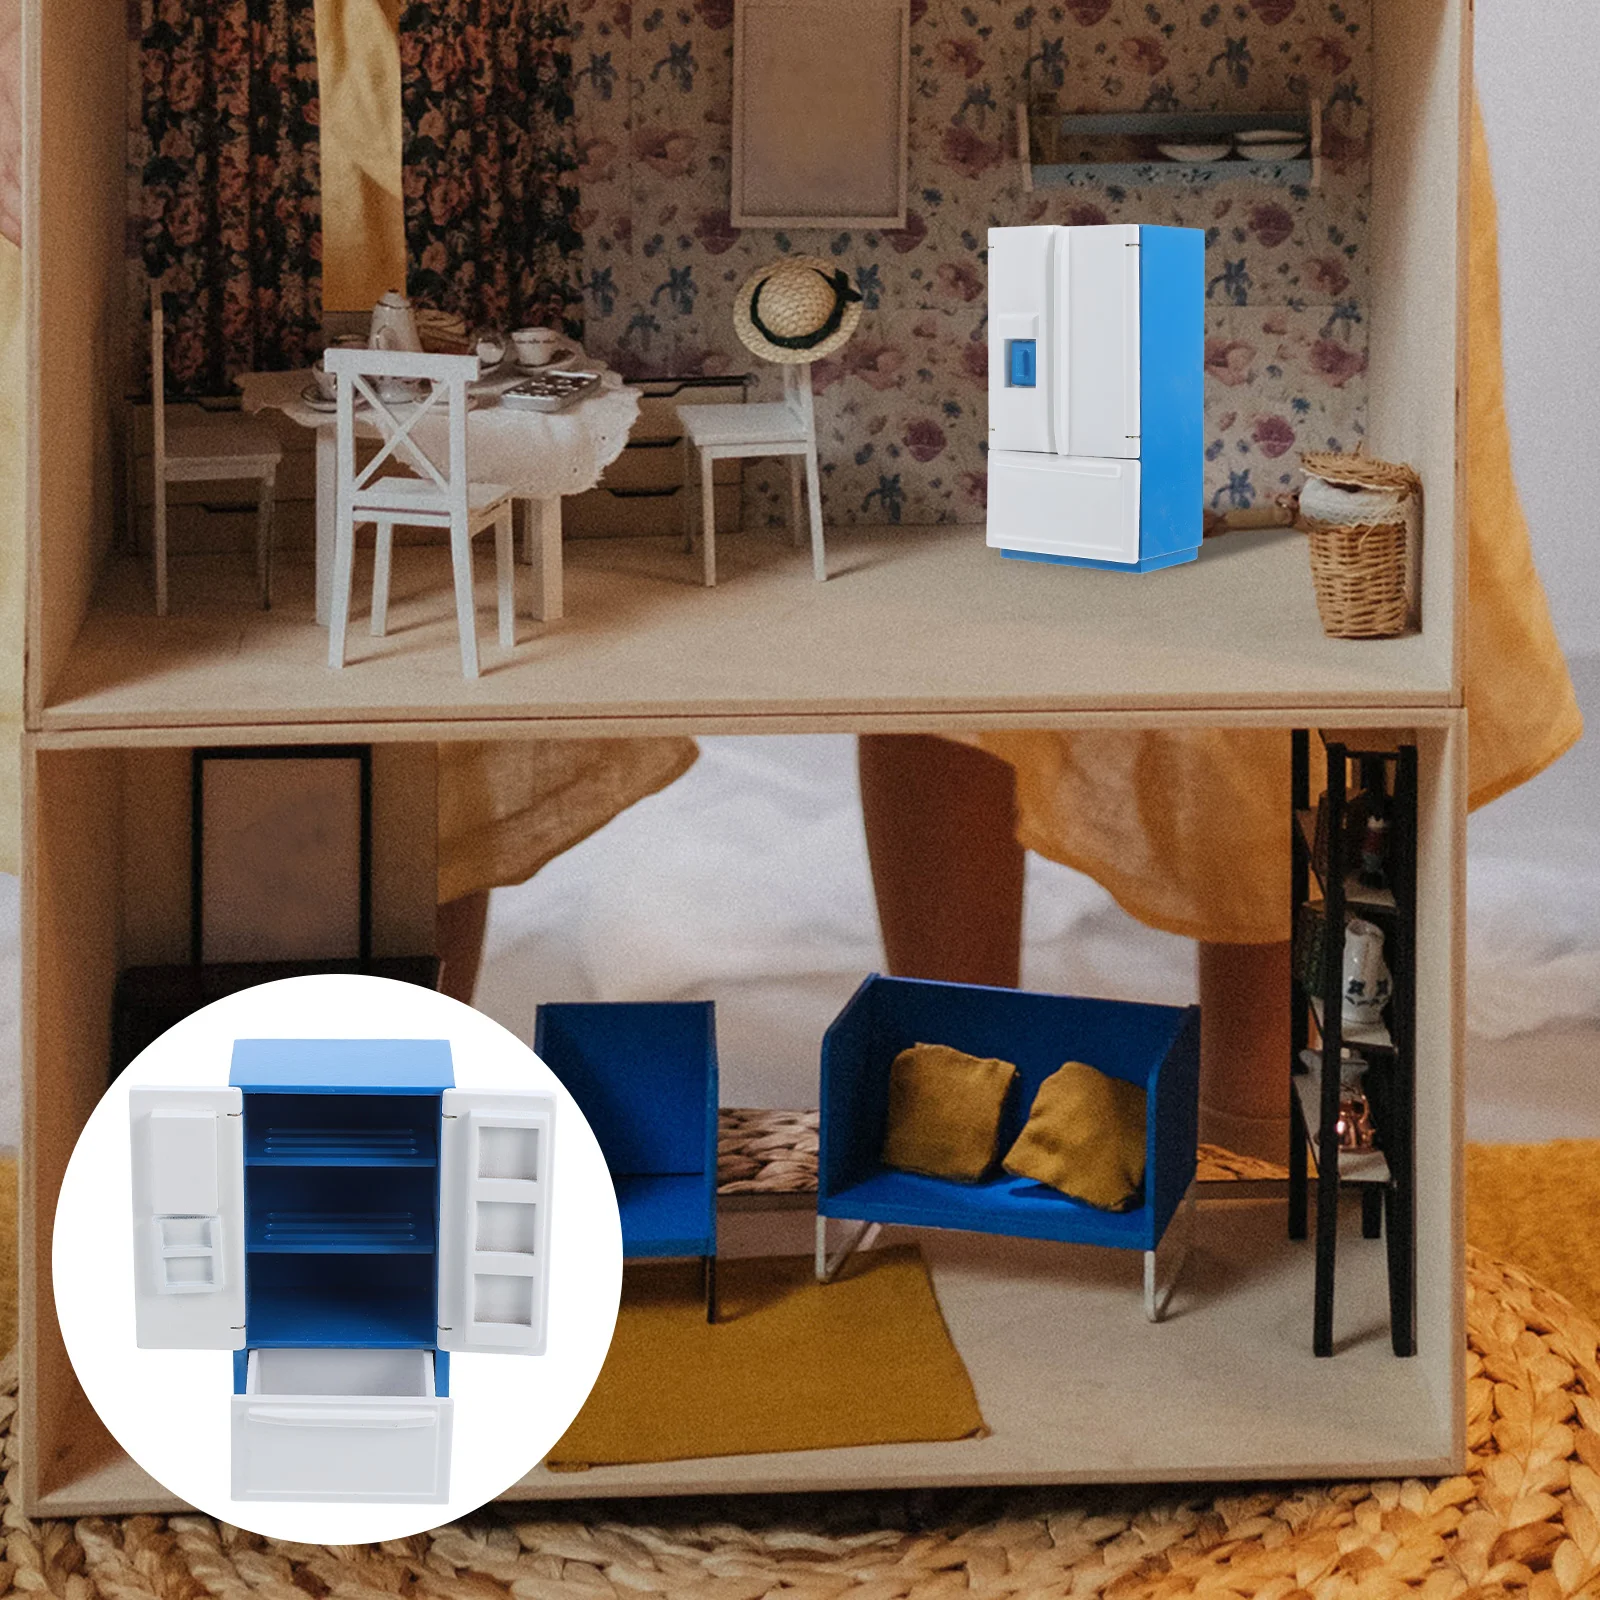 

Refrigerator Children’s Toys 1:12 Dollhouse Miniature Food Model Double Door Blue Fridge for Crafts Miniatures Baby Small White